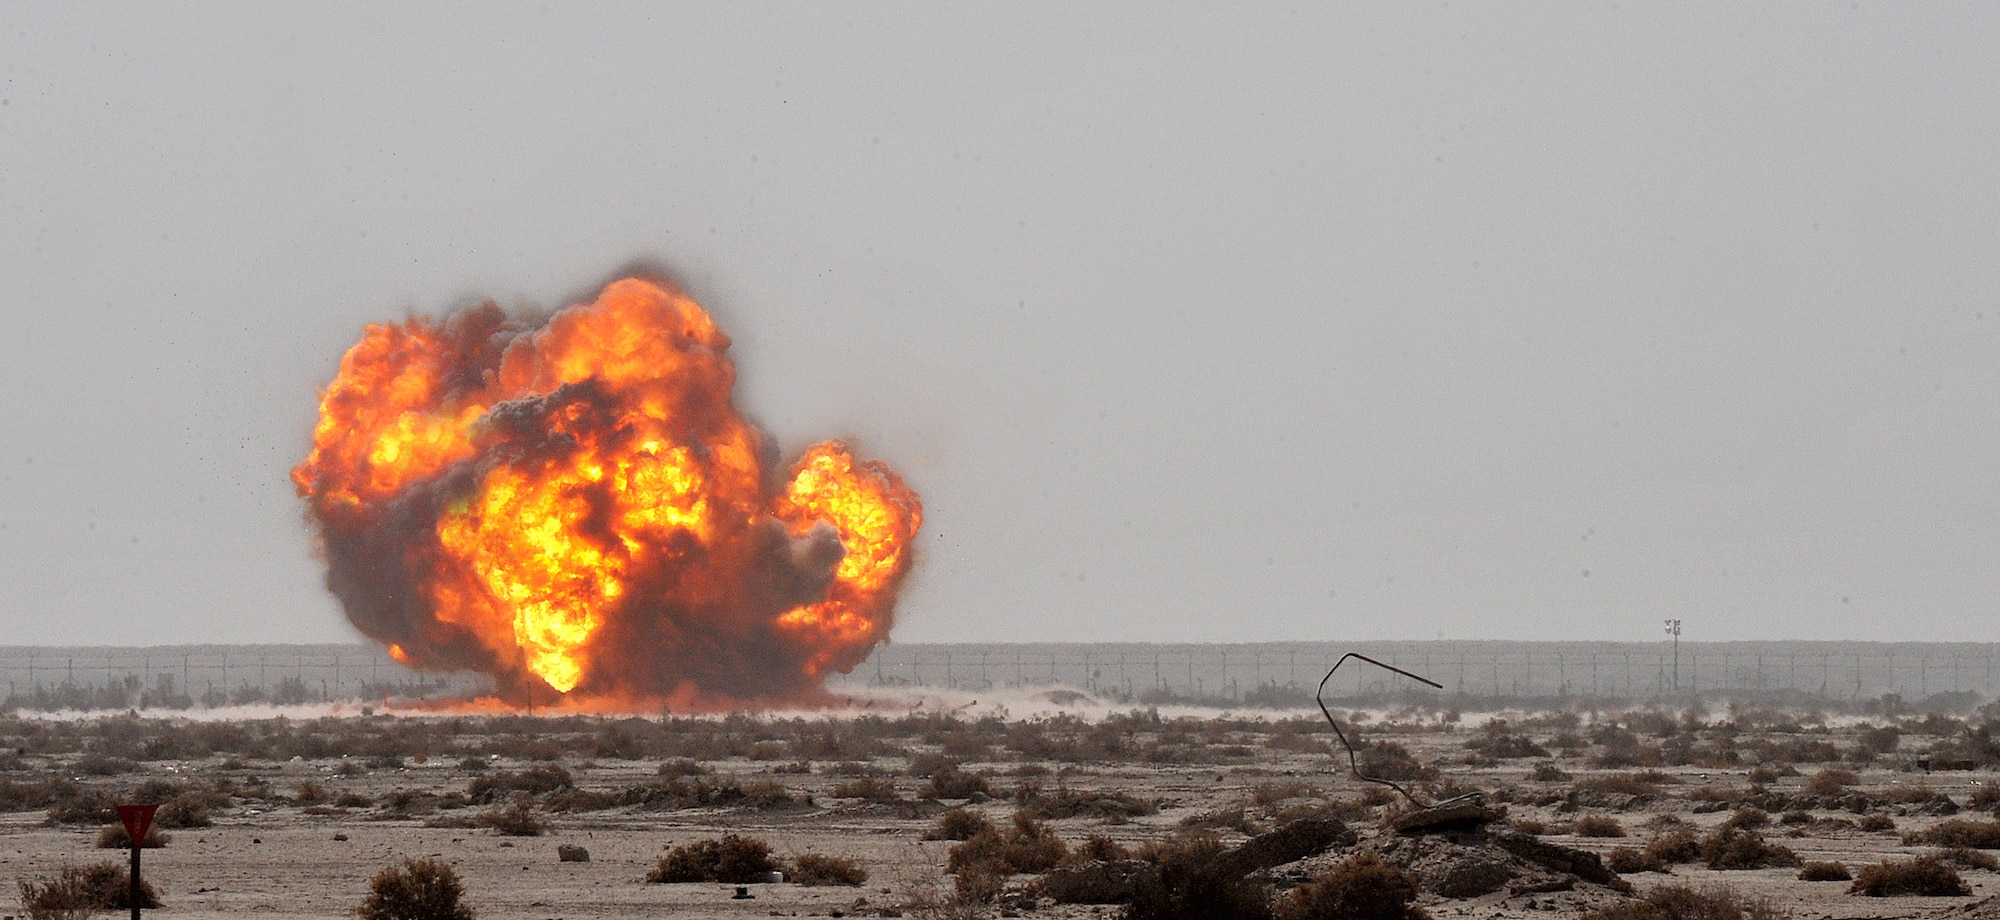 The 407th Expeditionary Operations Support Squadron explosive ordnance disposal team along with an U.S. Army EOD team successfully detonates a pile of 40 millimeter rounds and C-4 March 3, 2010, at Ali Air Base, Iraq.  (U.S. Air Force photo by Senior Airman Andrew Lee/Released)